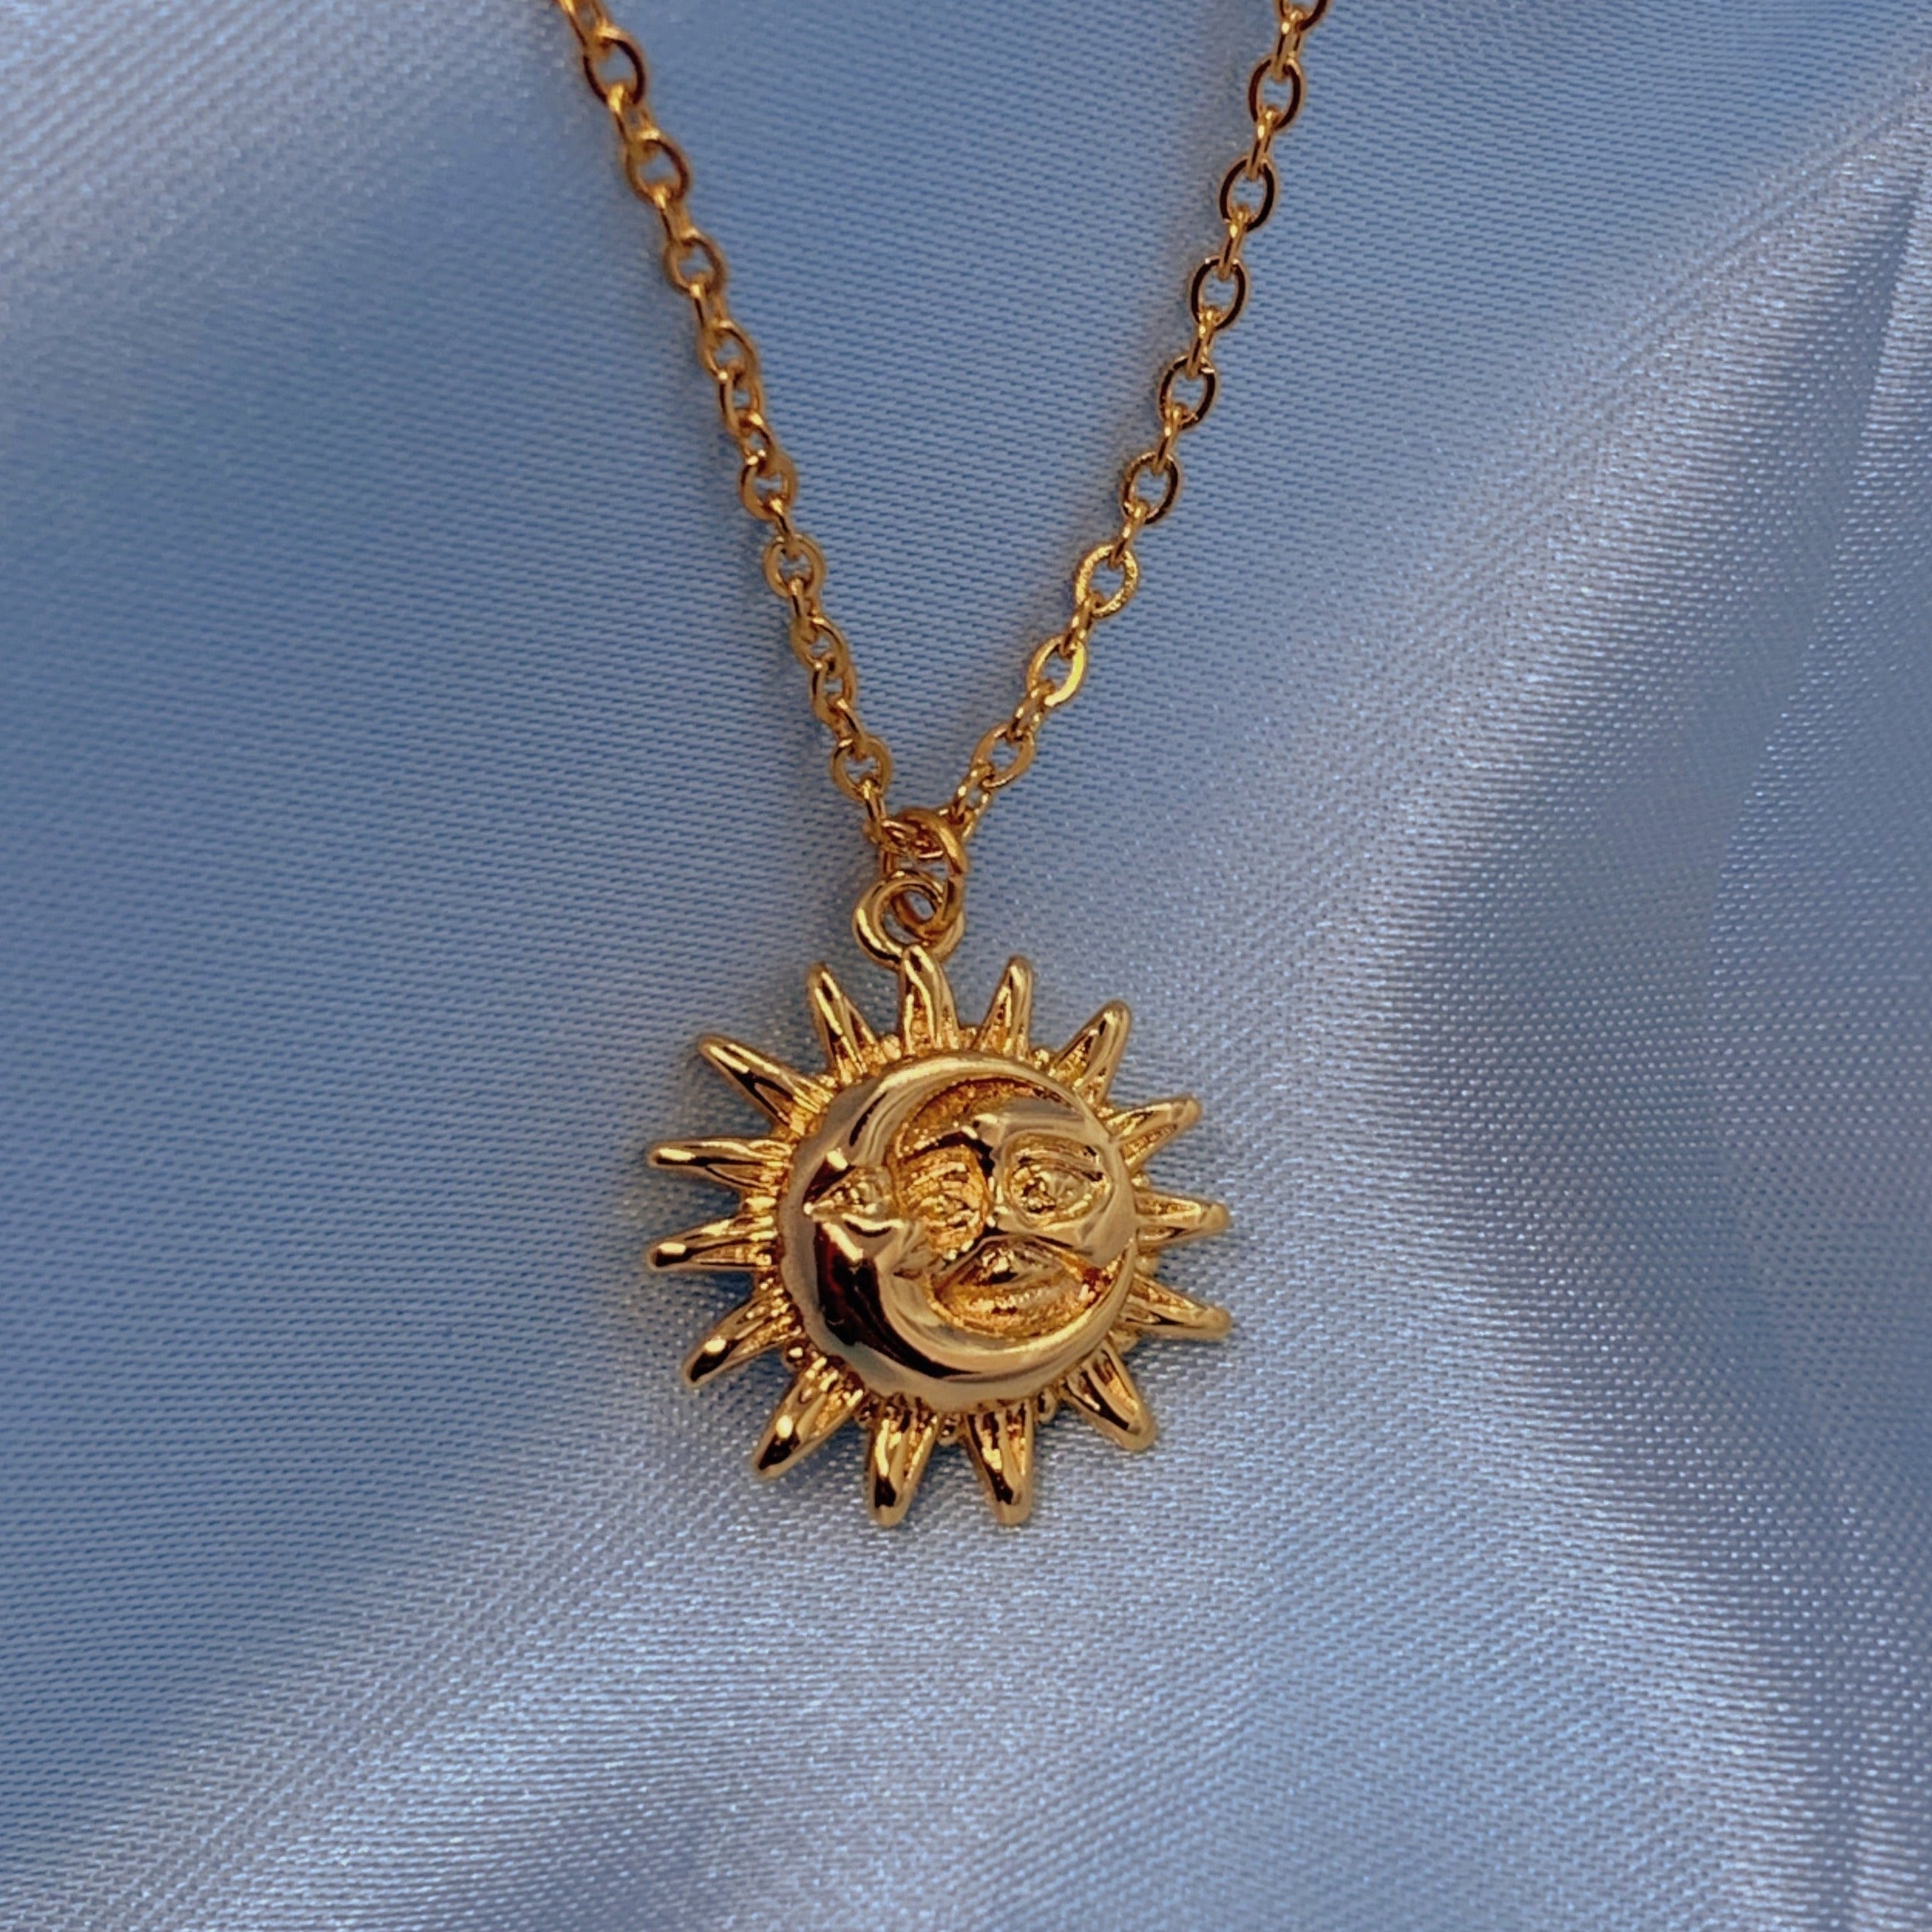 Buy Gold Sun Face and Moon Pendant Necklace, Sun and Moon Coin Necklace,  Bridesmaid Gift, Birthday Gift,layered Necklace, Coin Necklace Online in  India - Etsy